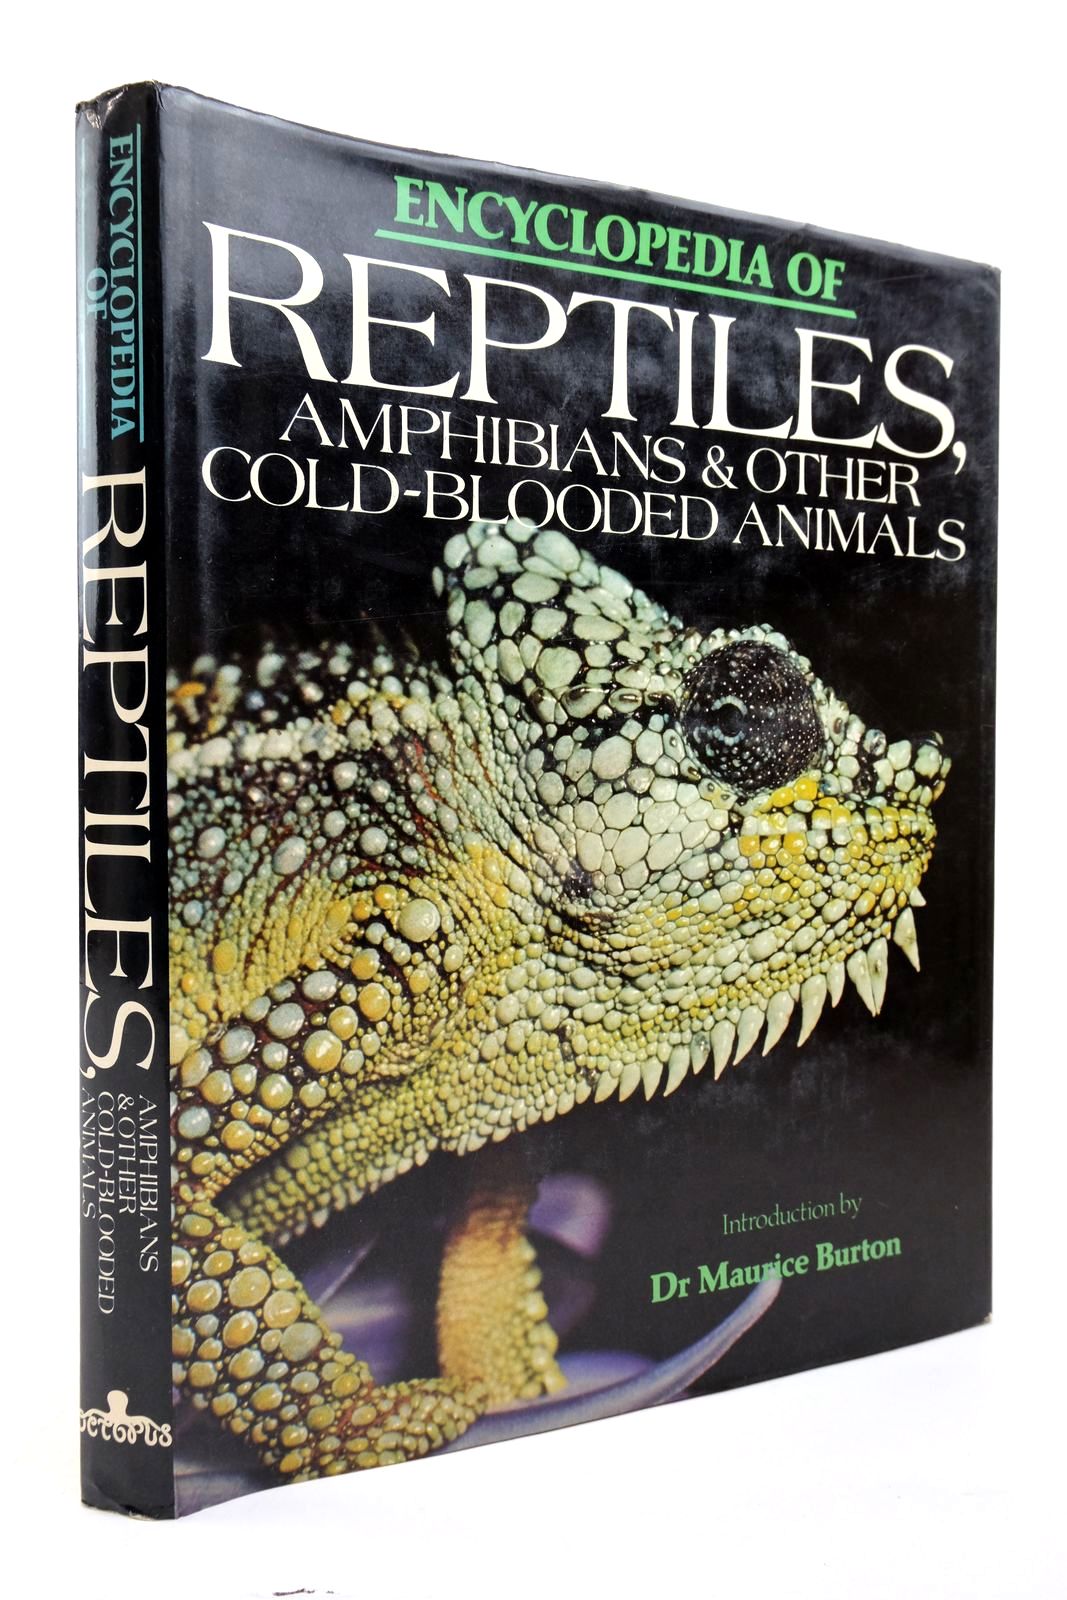 Photo of ENCYCLOPEDIA OF REPTILES, AMPHIBIANS & OTHER COLD-BLOODED ANIMALS- Stock Number: 2139211